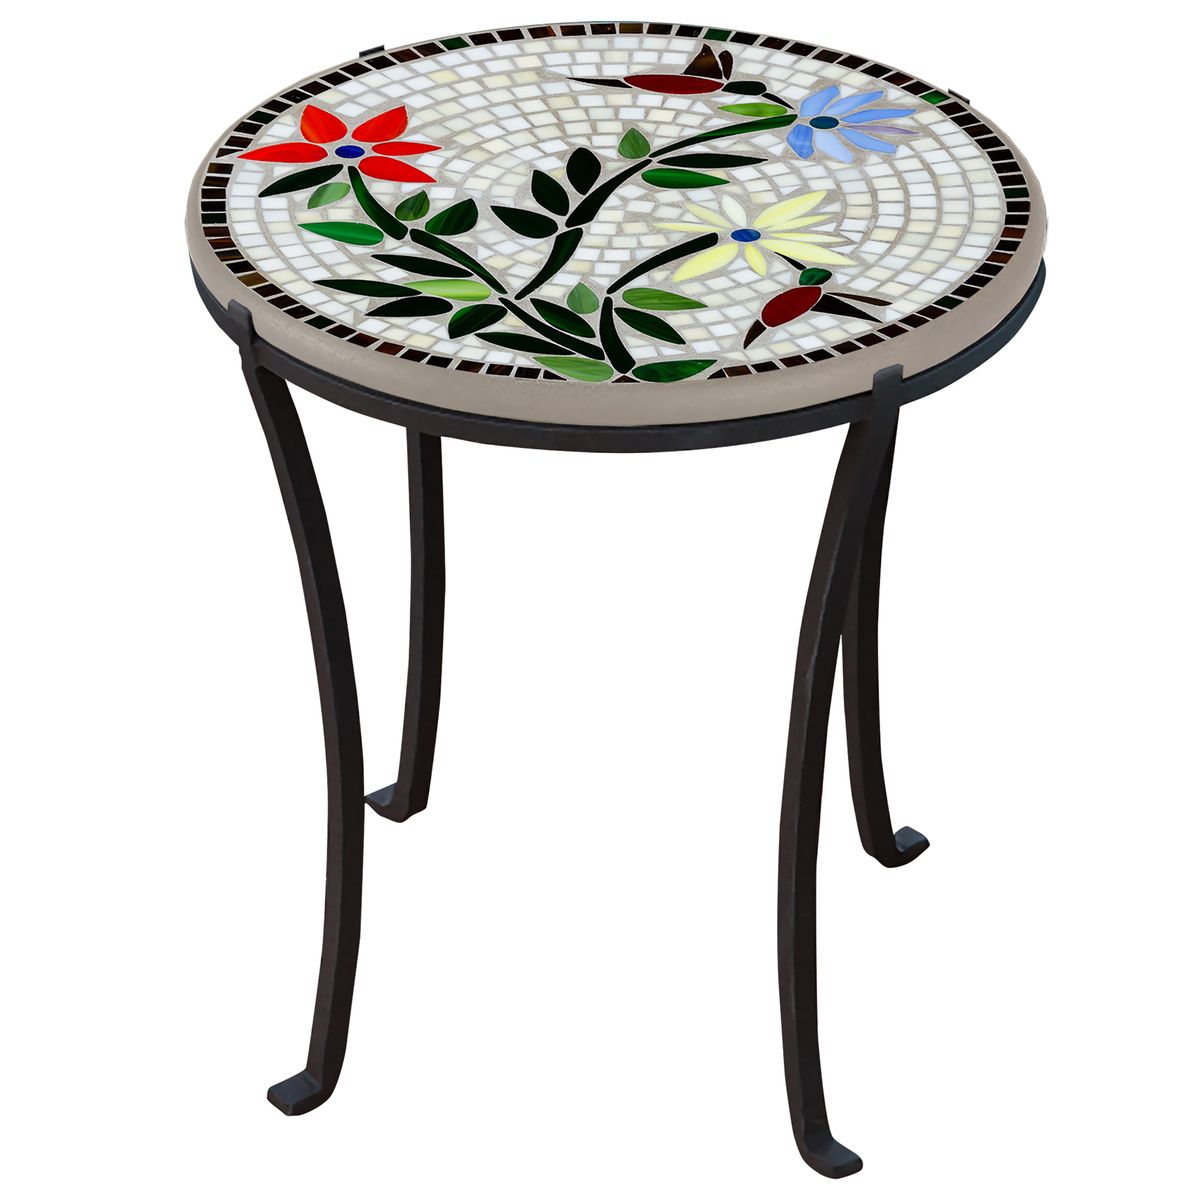 Hummingbird Mosaic Chaise Table-Iron Accents